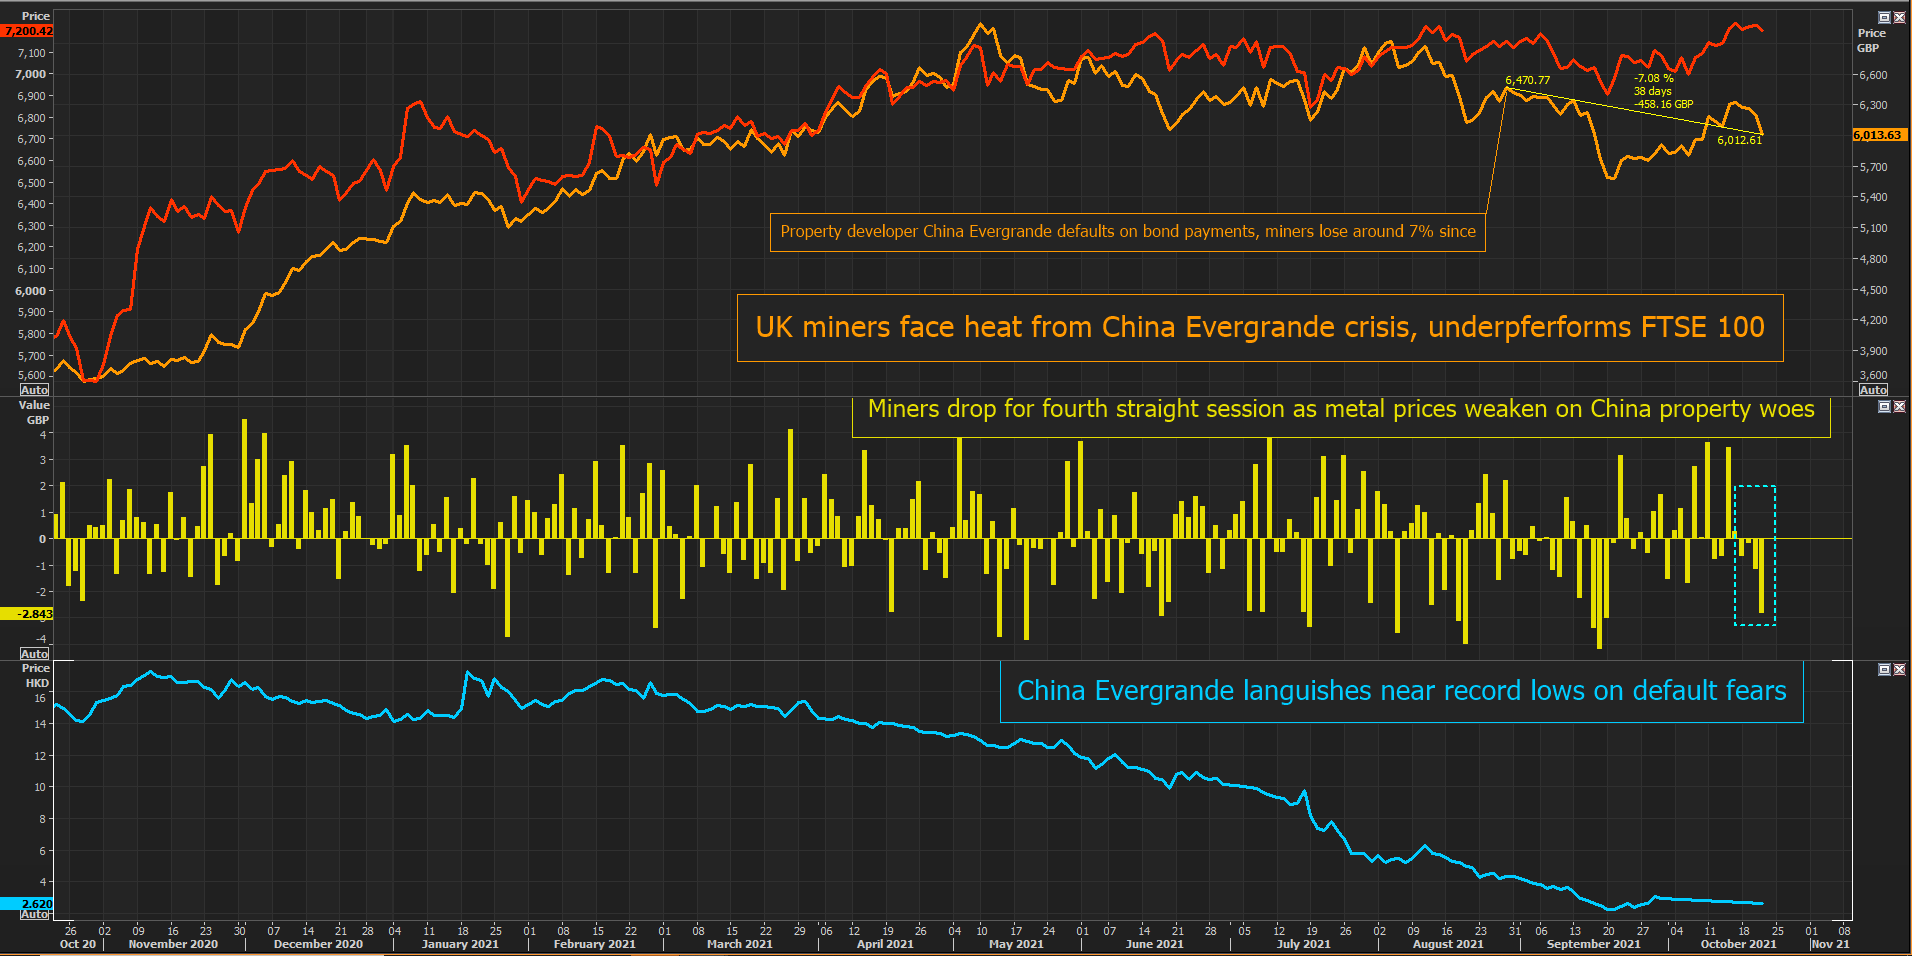 UK miners face heat from China Evergrande